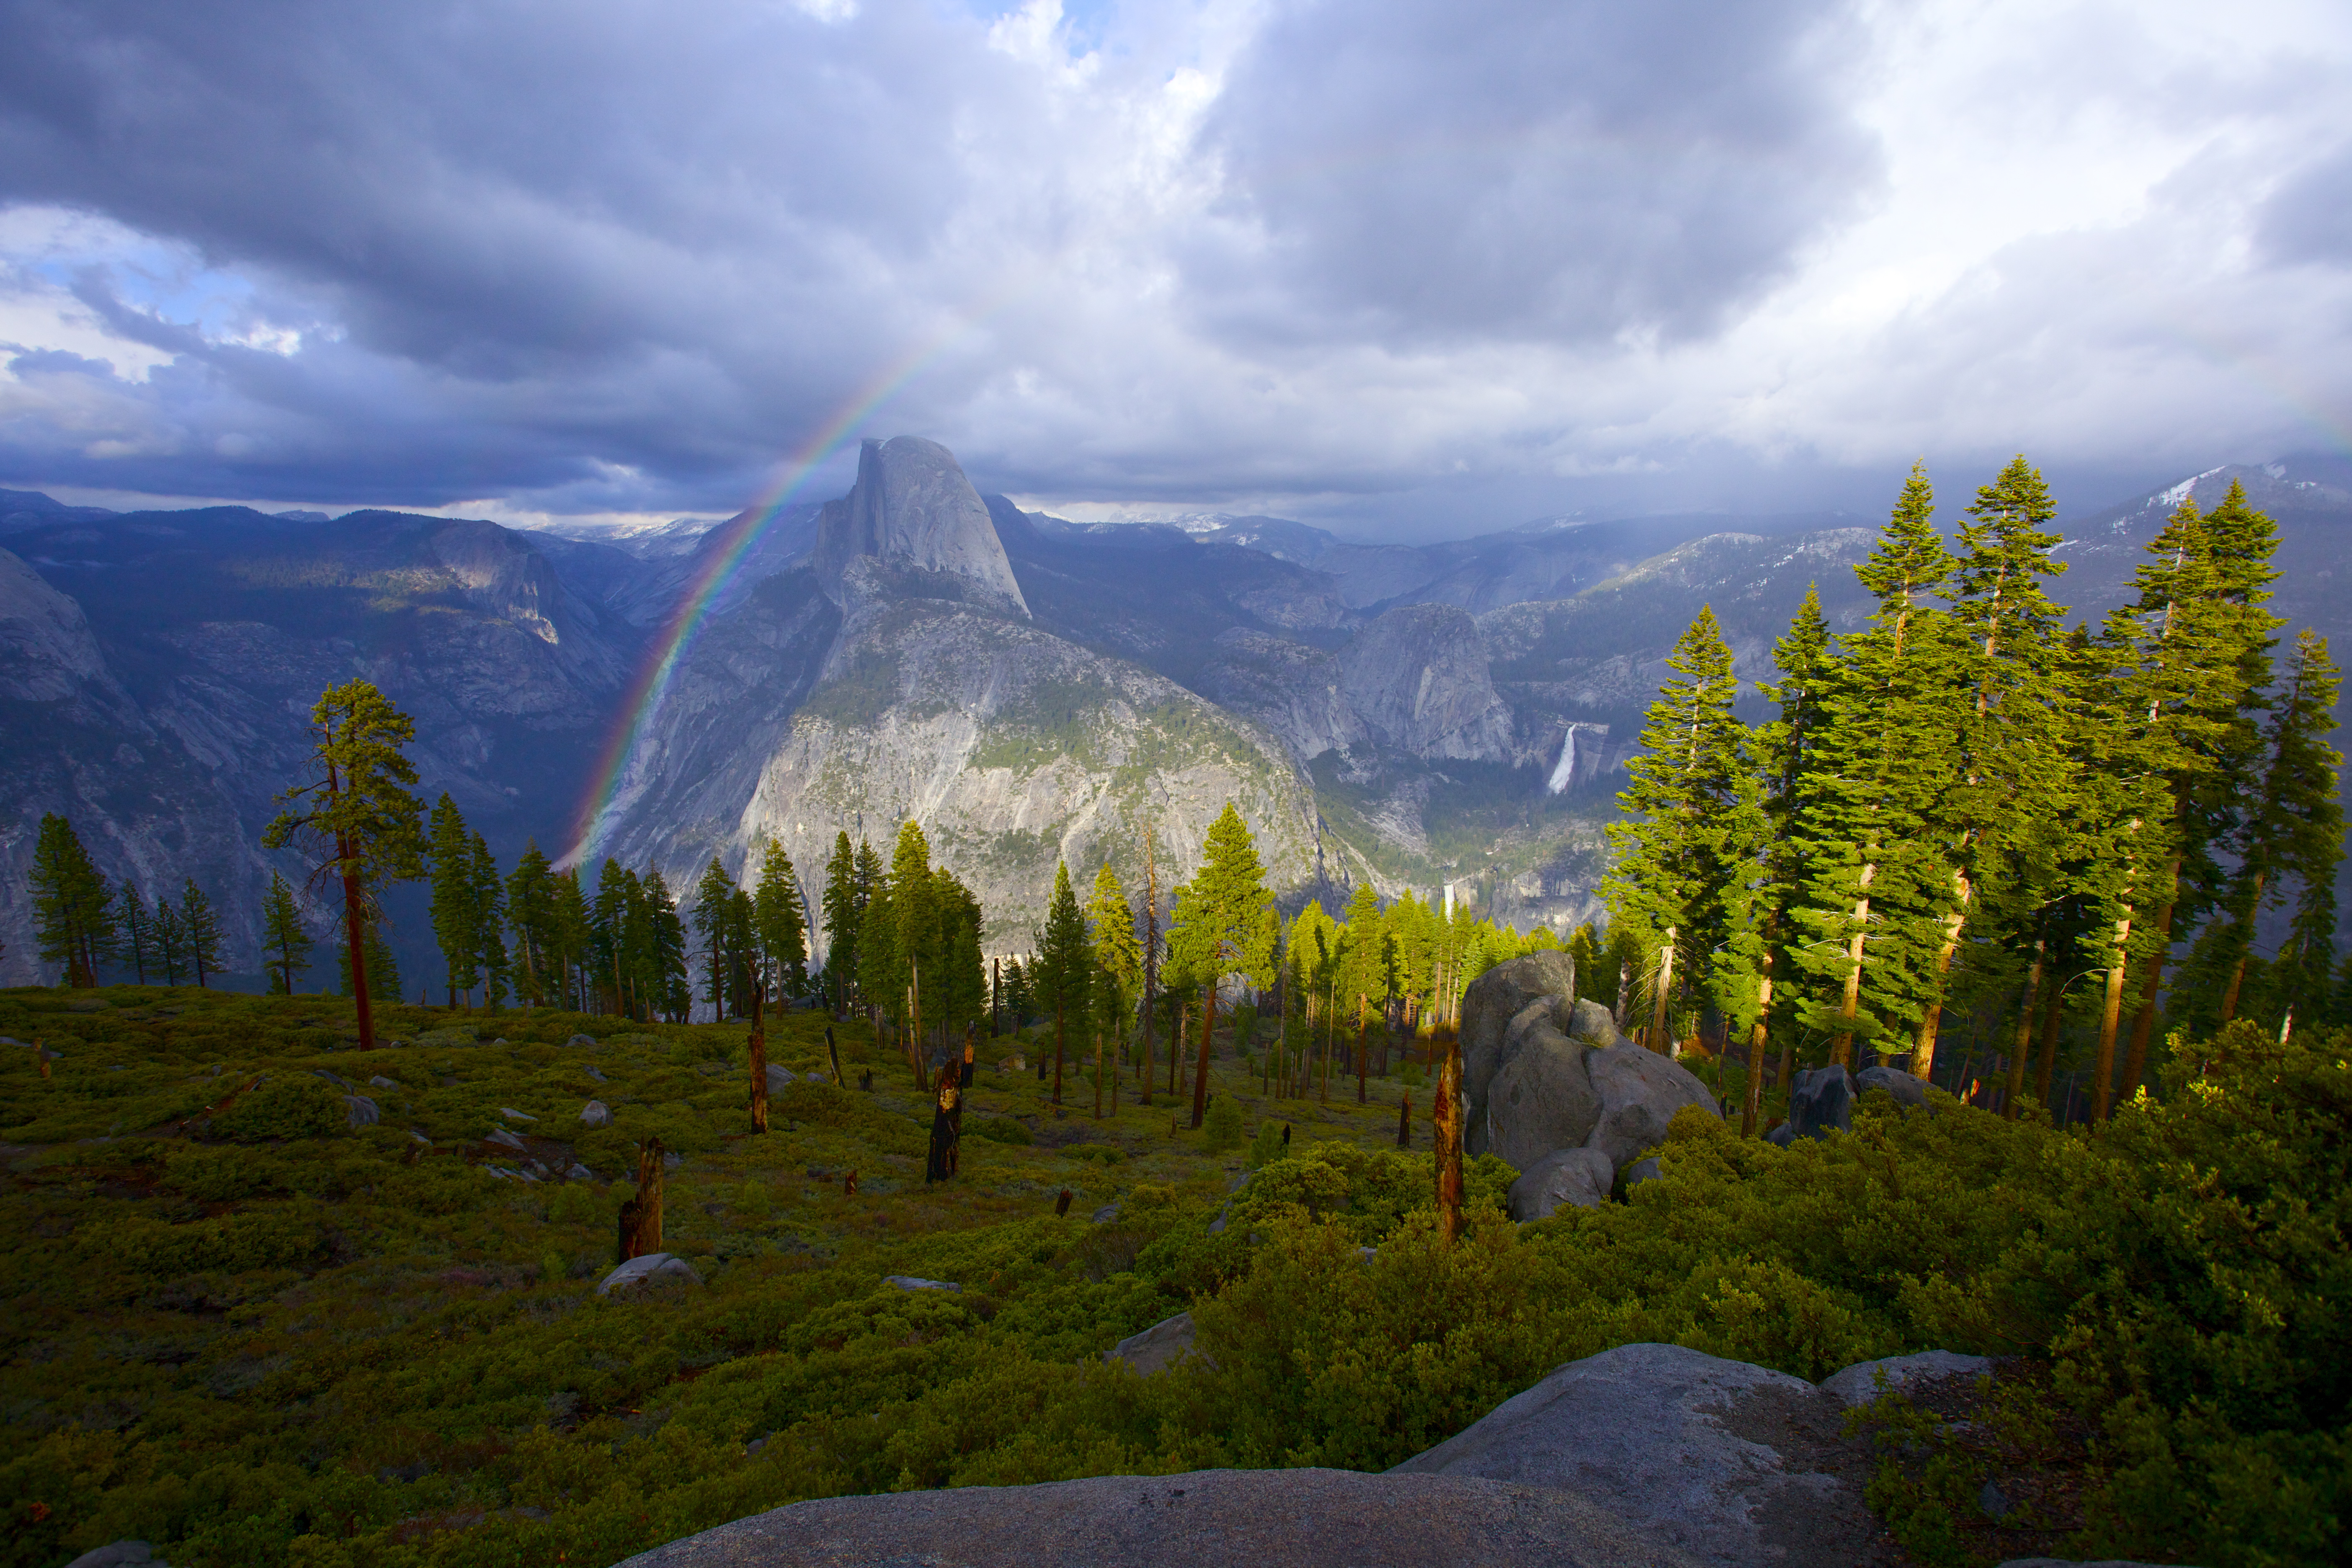 A rainbow over a mountain in the distance.